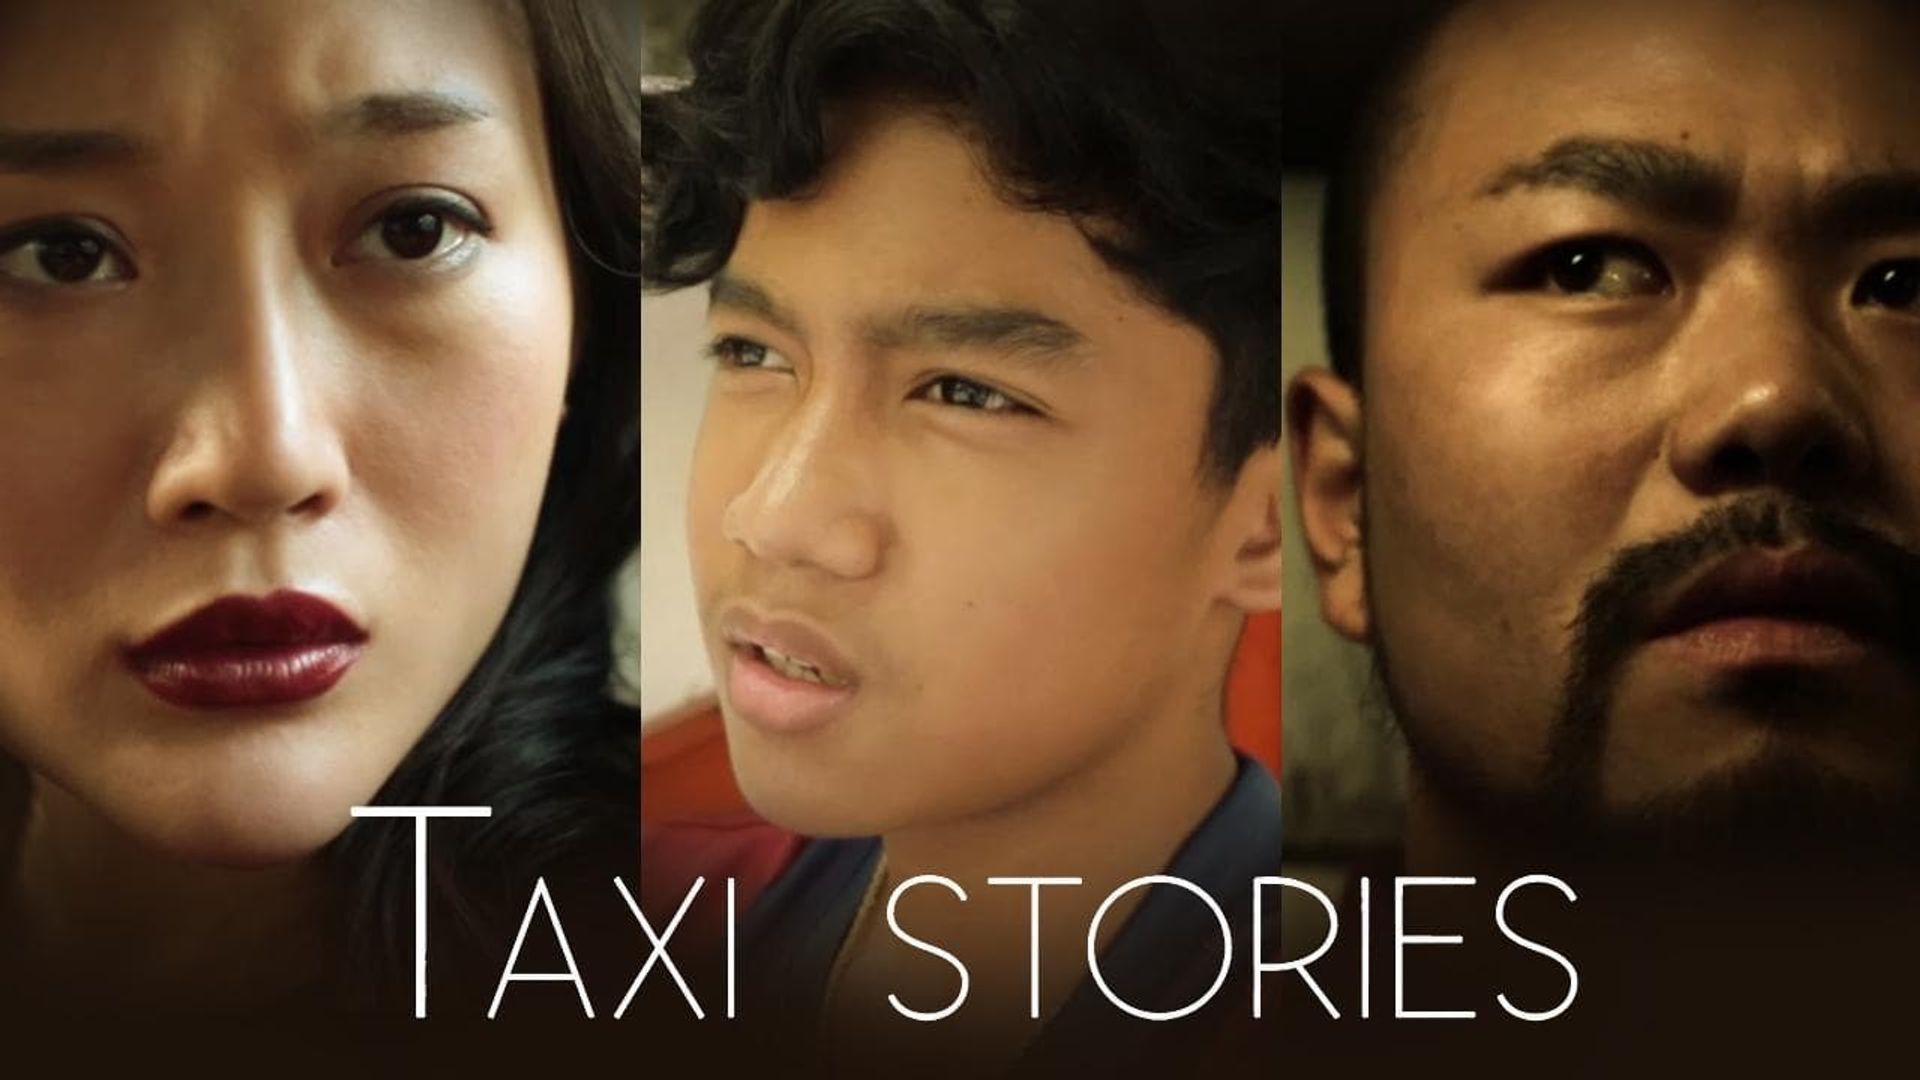 Taxi Stories background